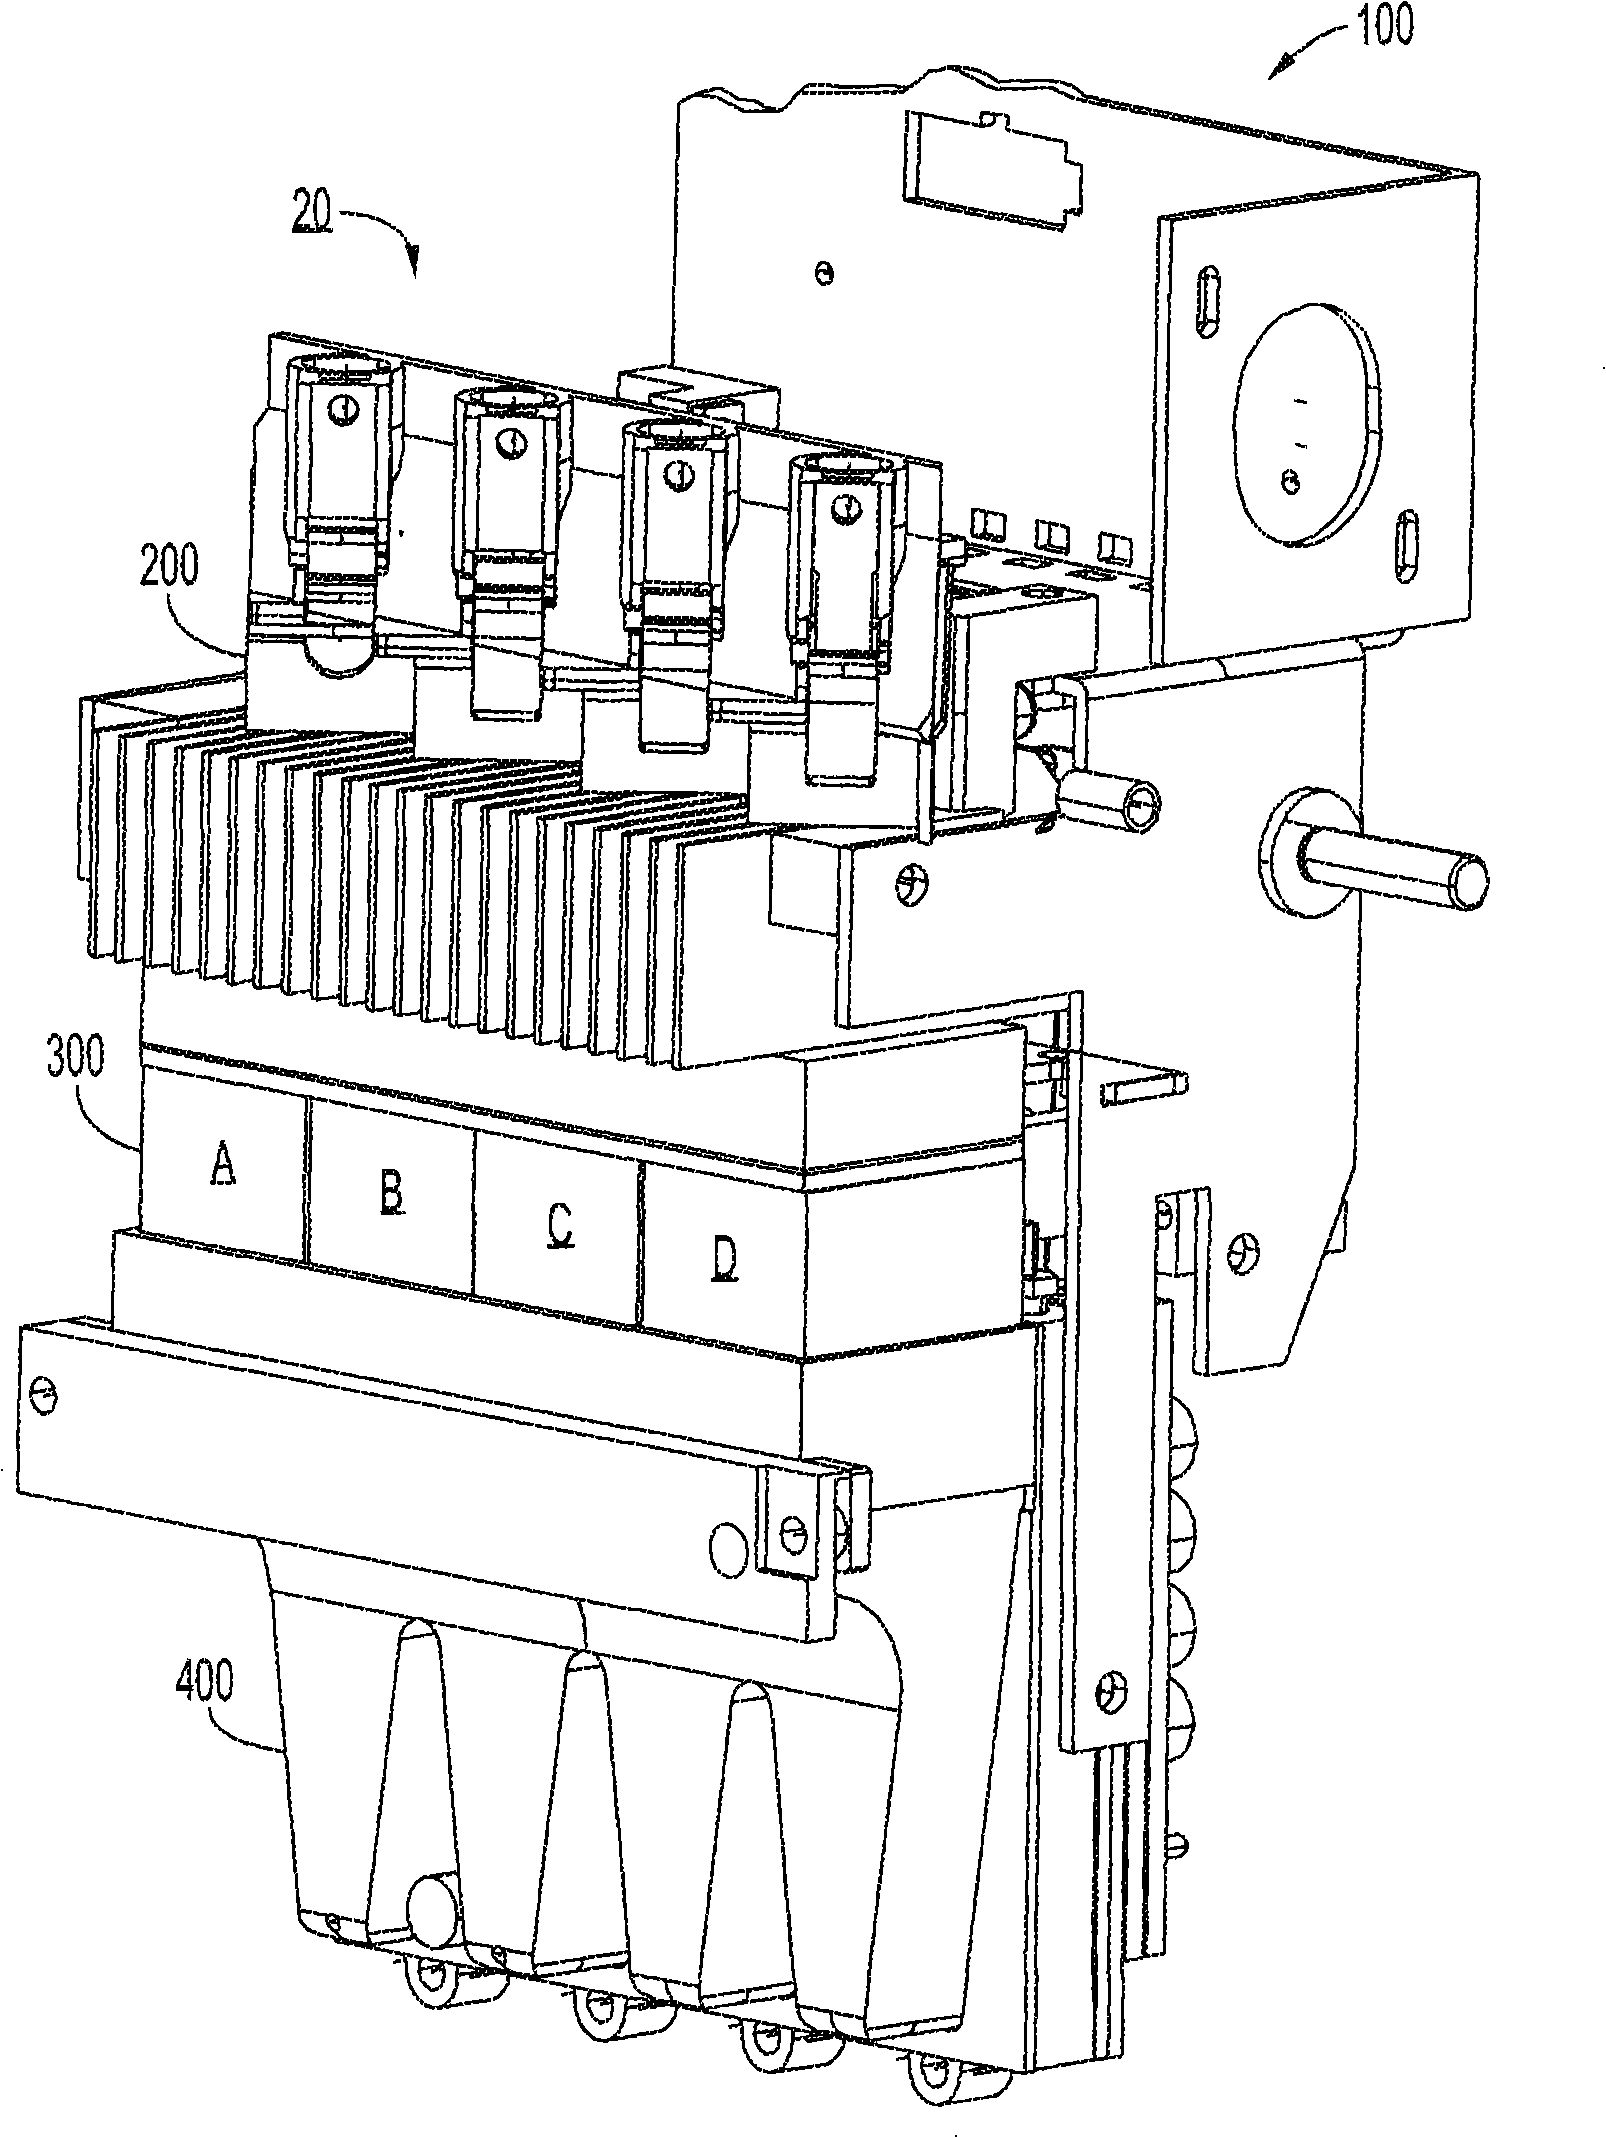 Valve assembly of machine for generating high speed phase change ink image